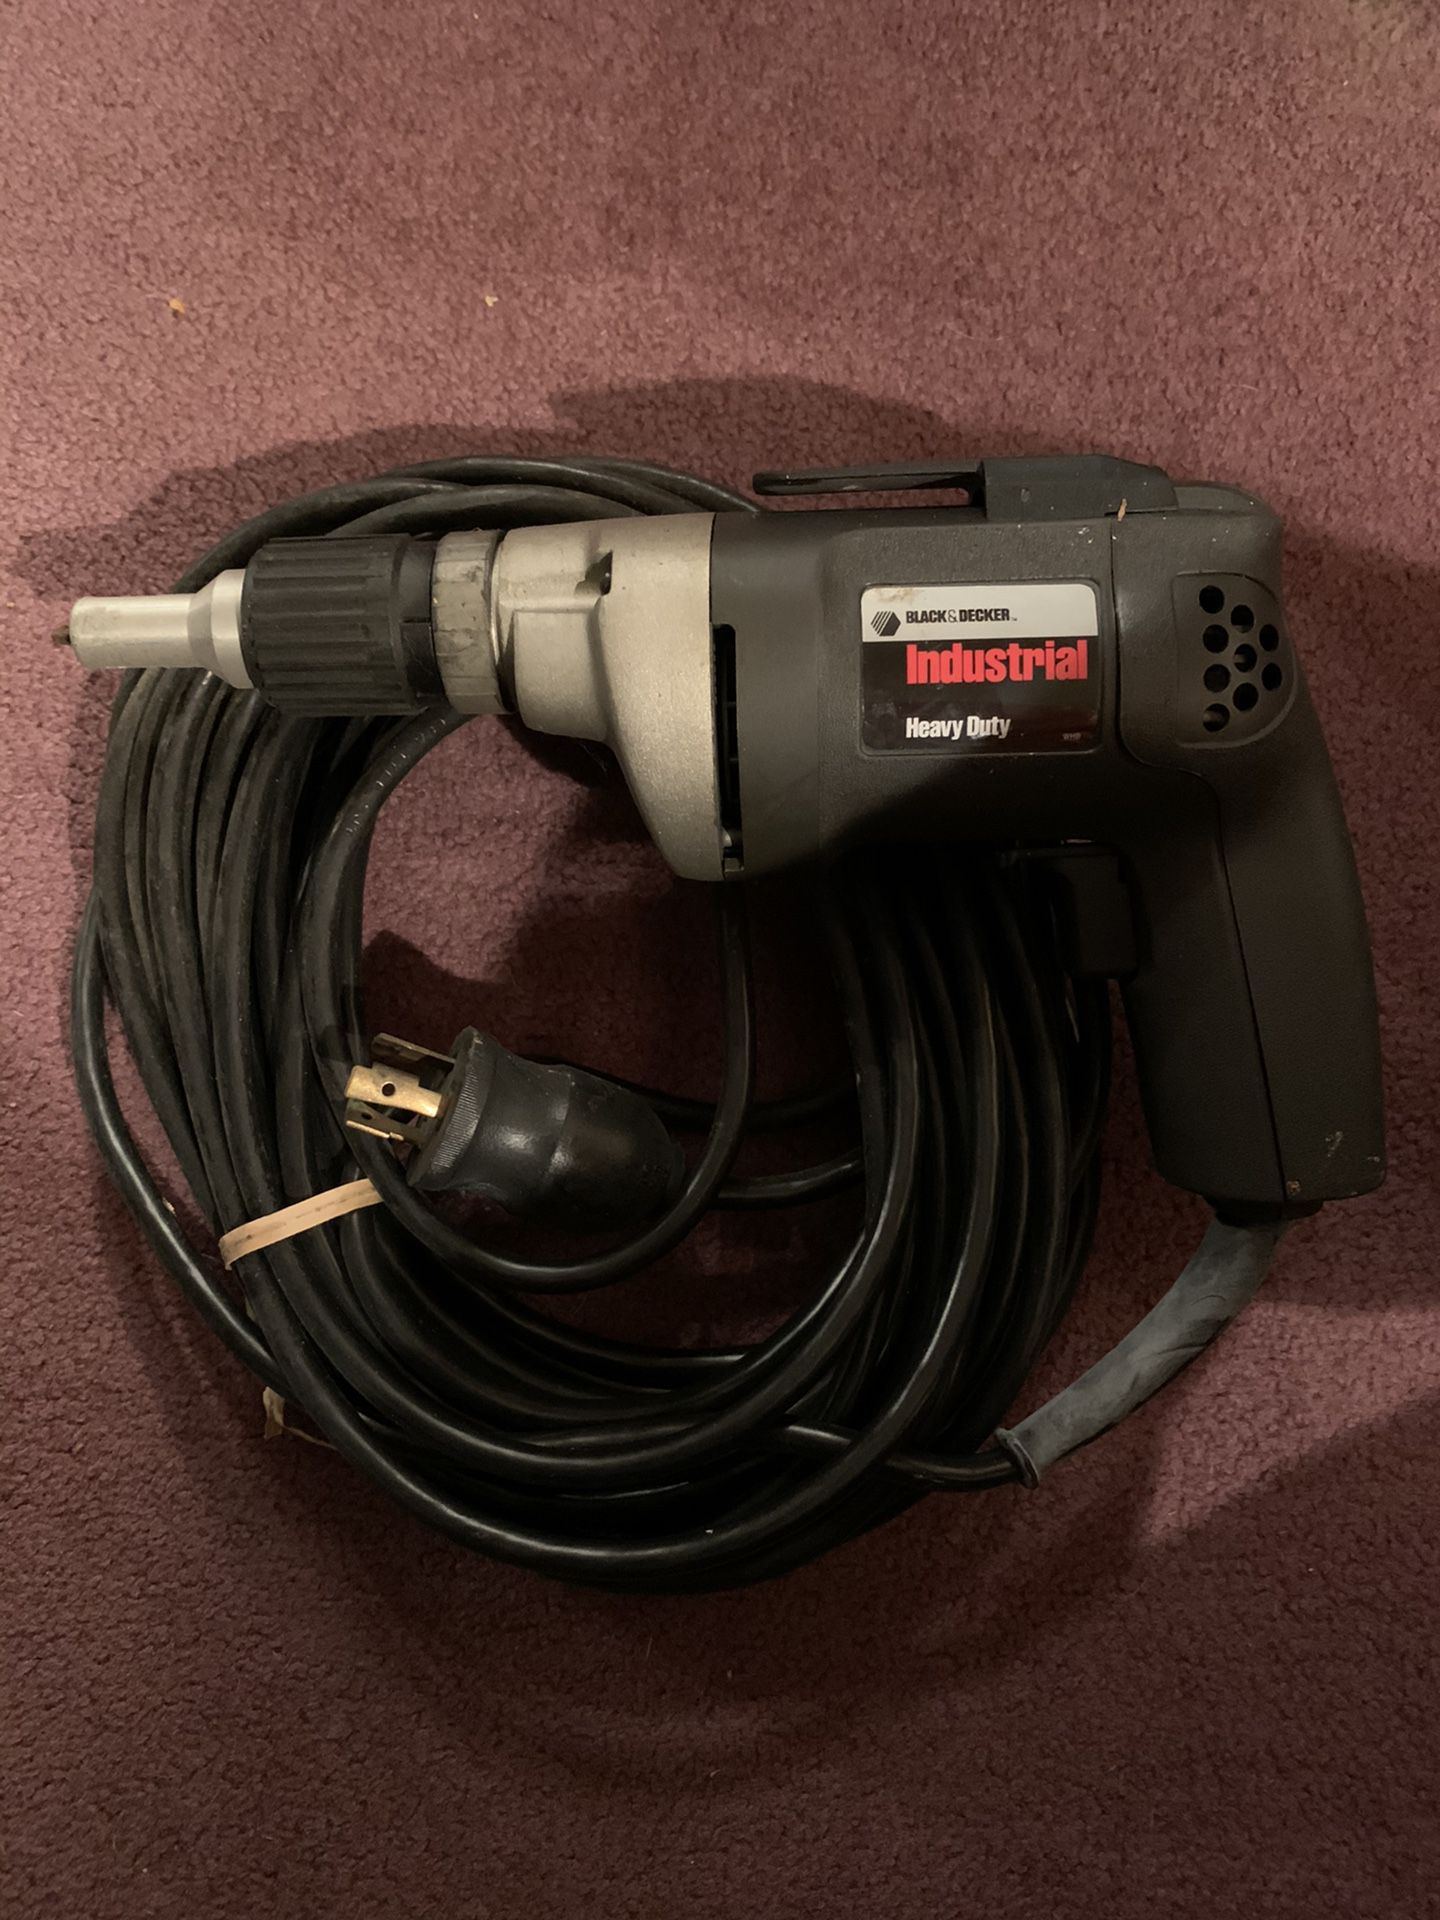 New Black & Decker LFX172 drill & new charger for Sale in Fayetteville, NC  - OfferUp